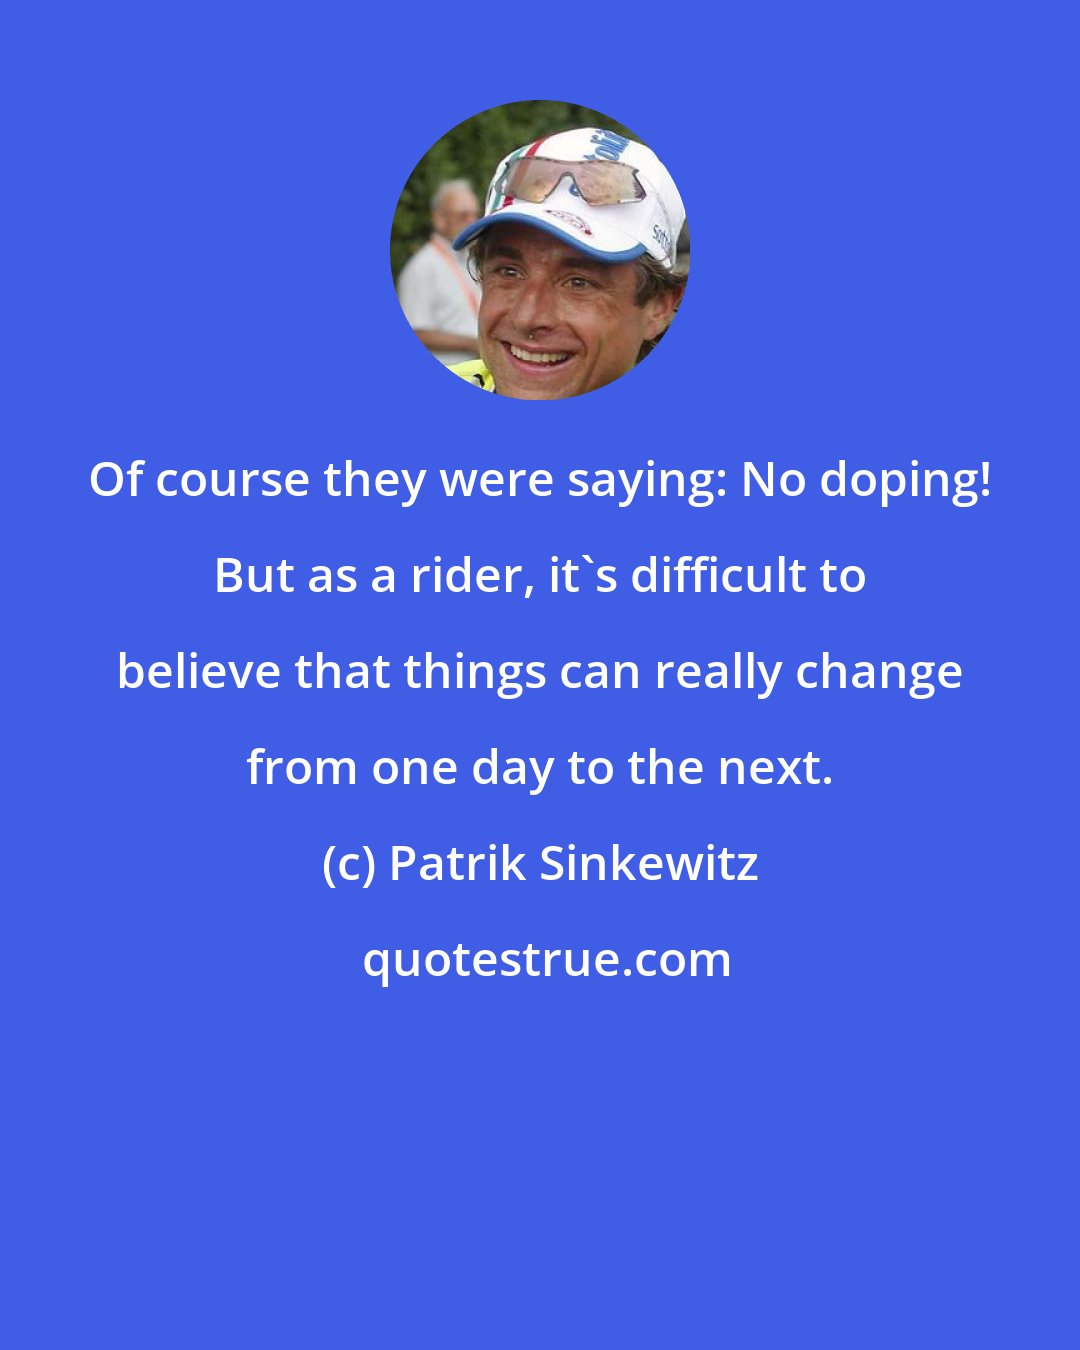 Patrik Sinkewitz: Of course they were saying: No doping! But as a rider, it's difficult to believe that things can really change from one day to the next.